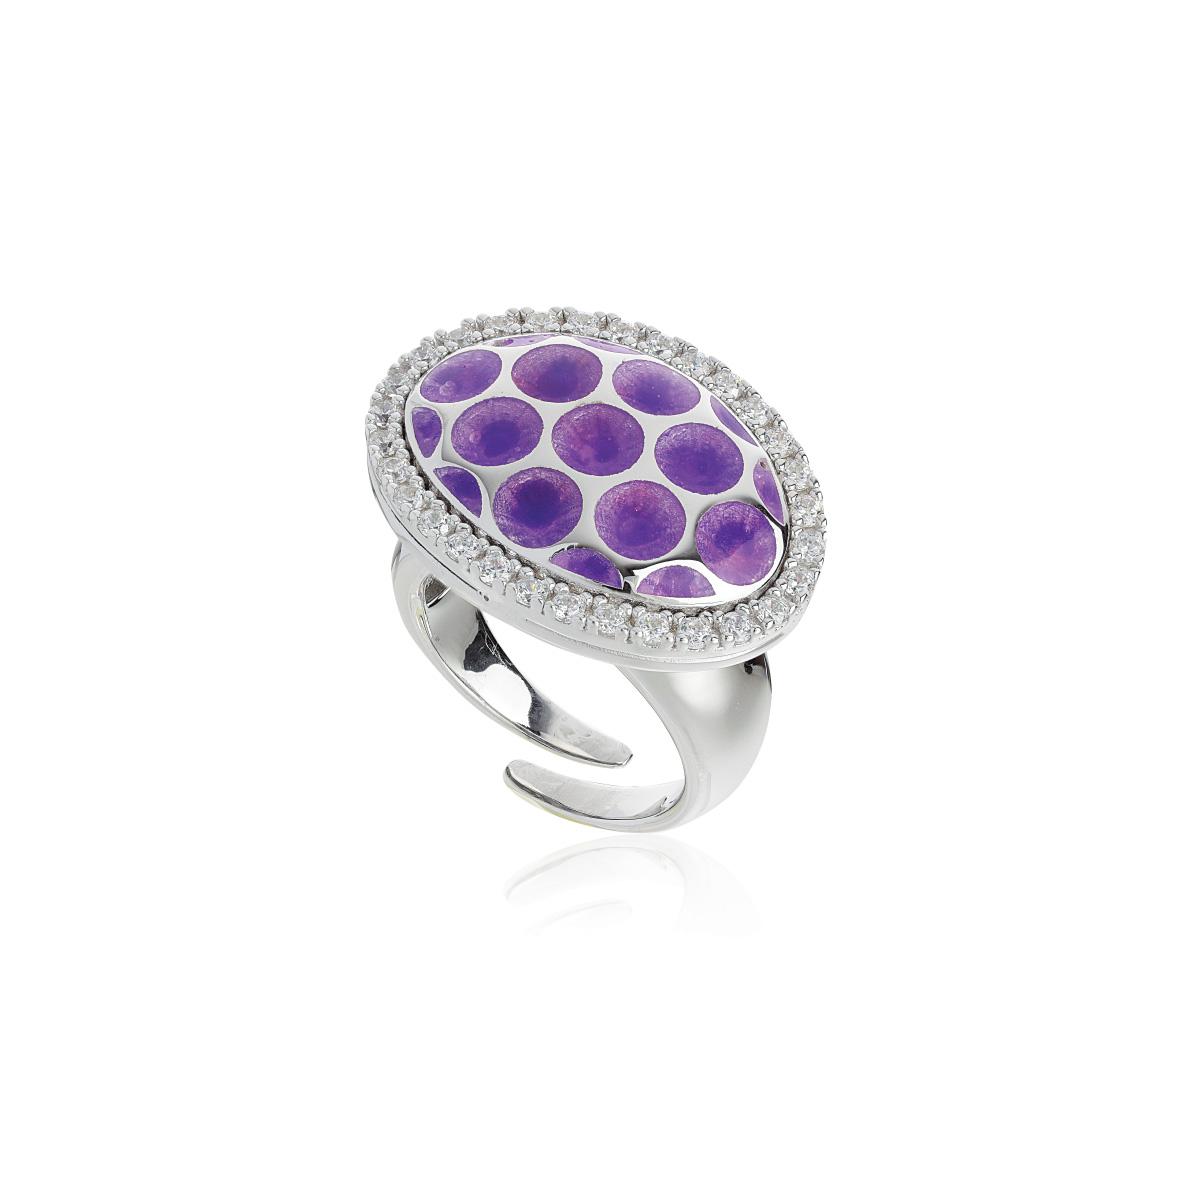 Ring in 925 rhodium-plated silver, hand-made enamelling, and cubic zirconia